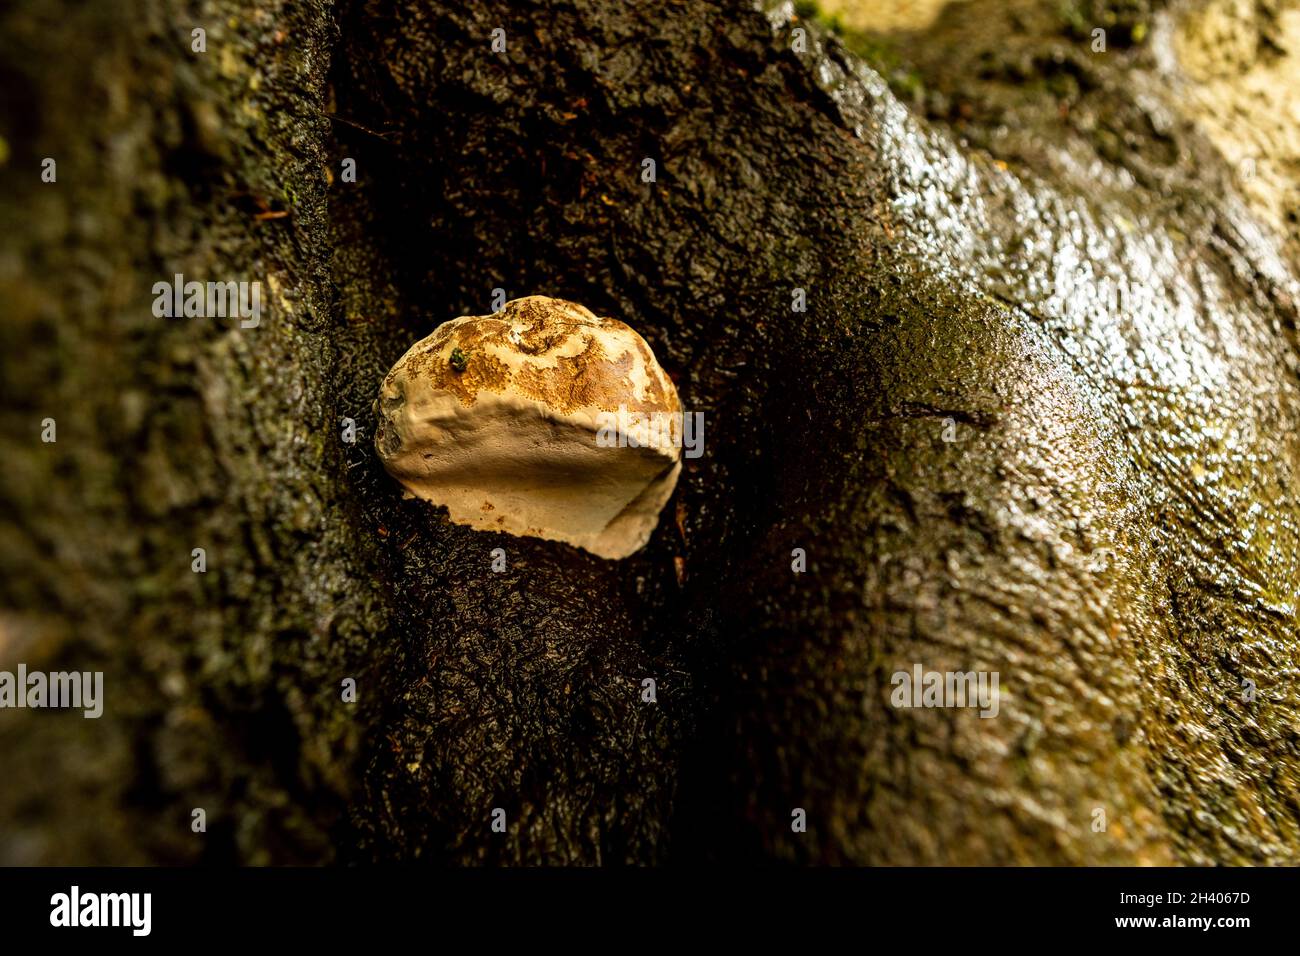 Autumn, Forest of Dean, England. Fungus Stock Photo